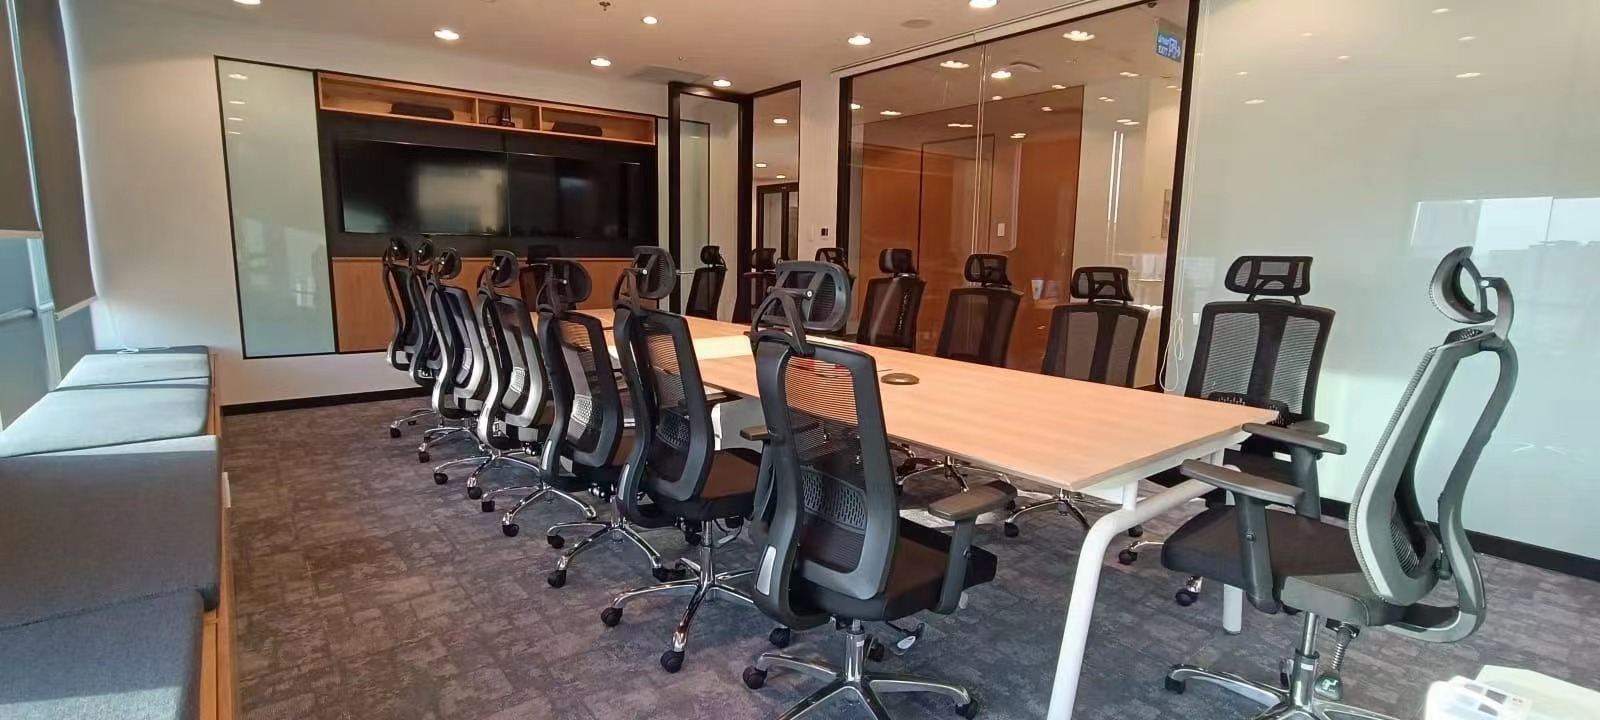 The Advantages of Wholesale Commercial Office Furniture for Your Business